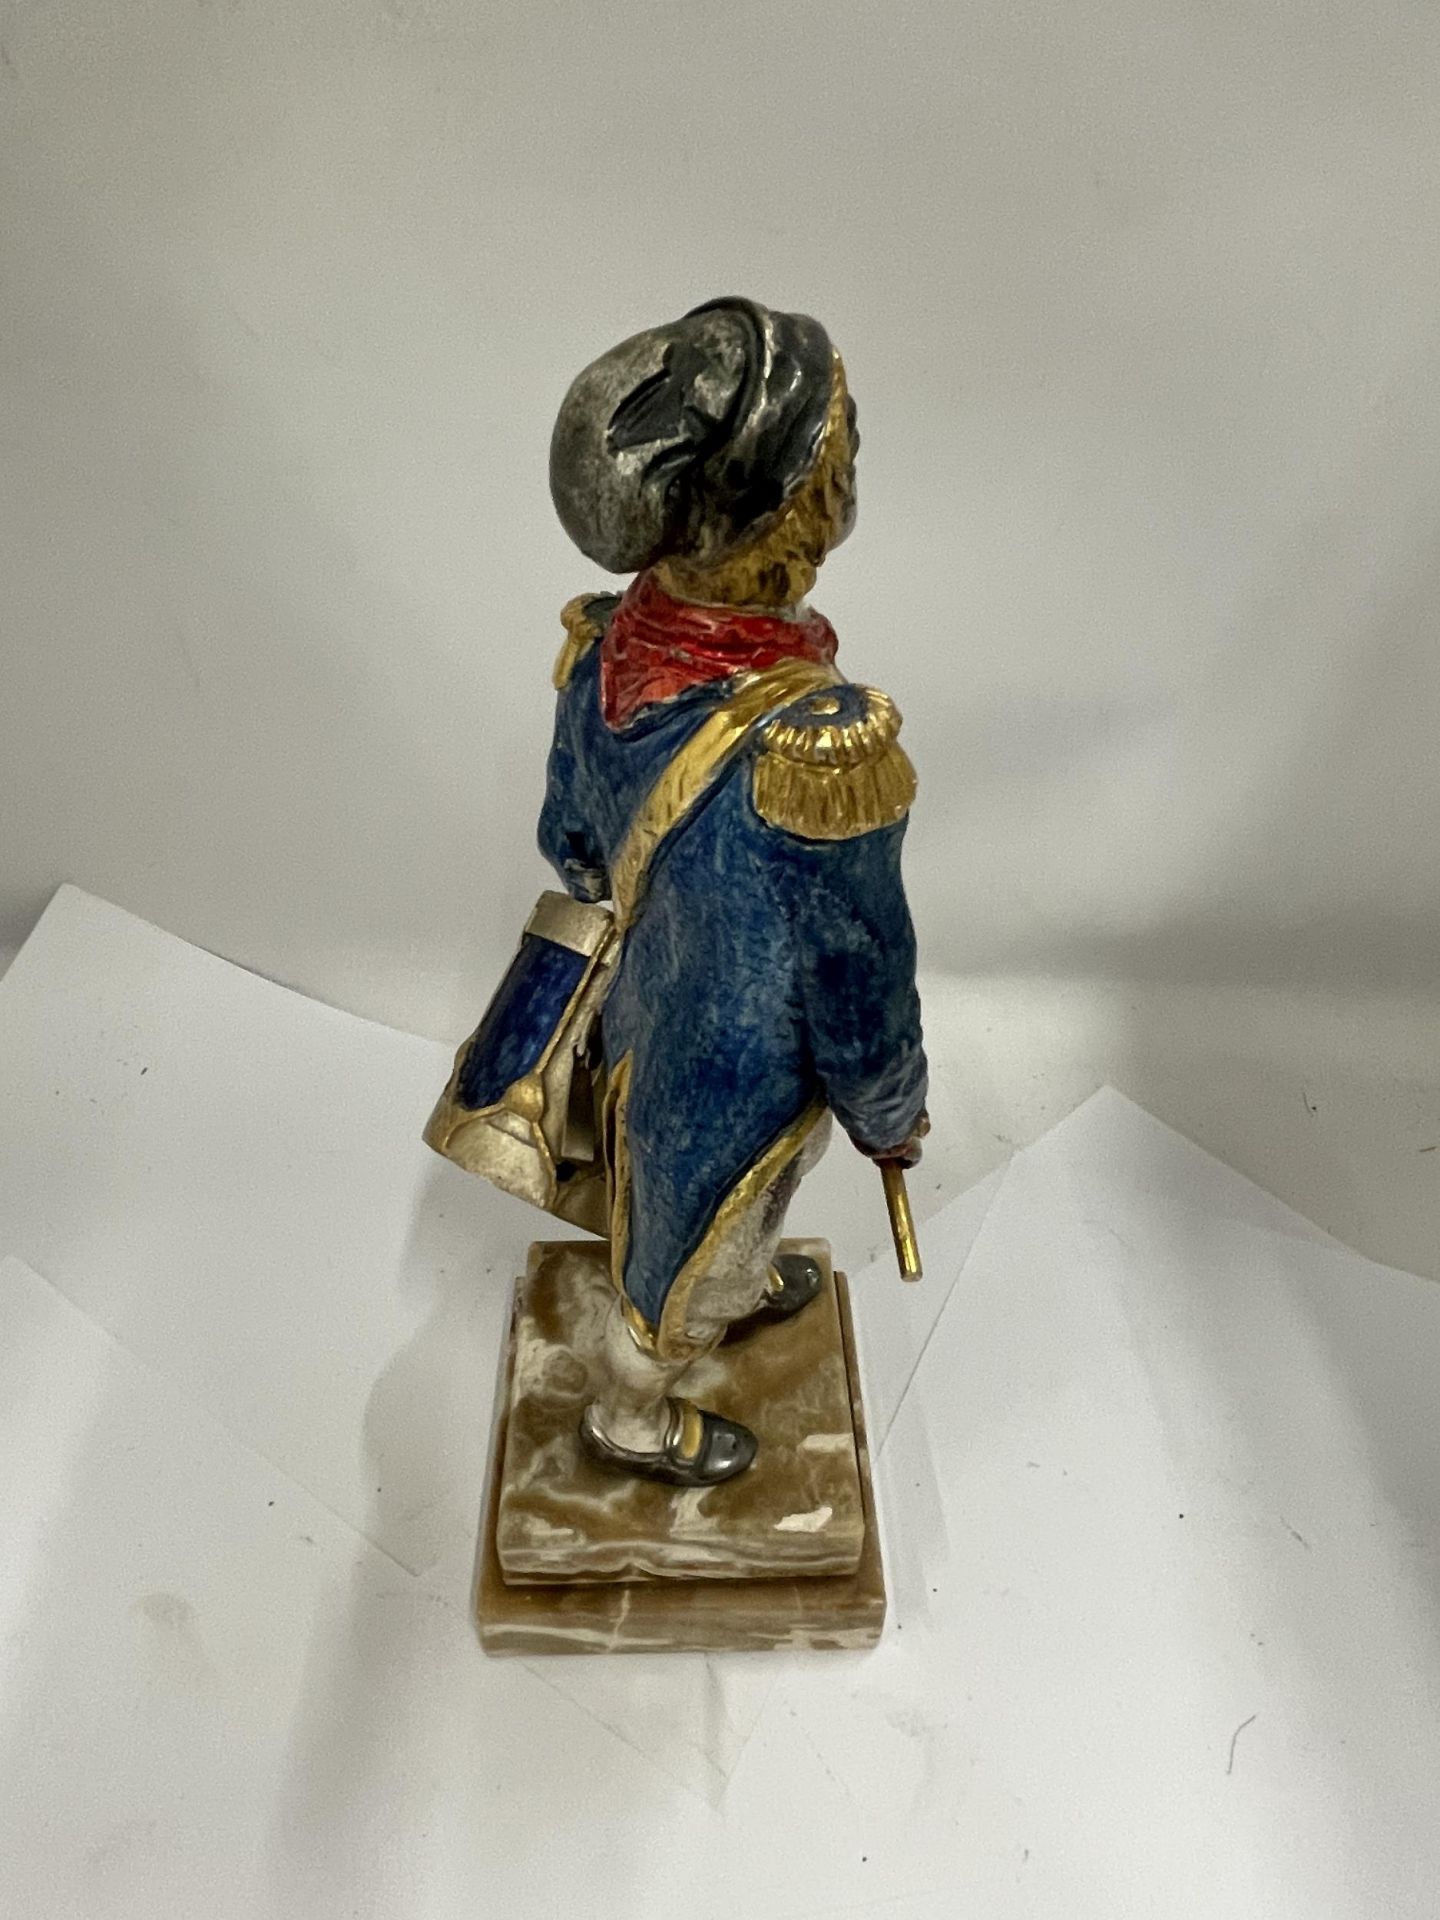 A LIMITED EDITION 9/200 FRENCH MODEL OF A DRUMMER BOY ON MARBLE BASE - Image 2 of 4